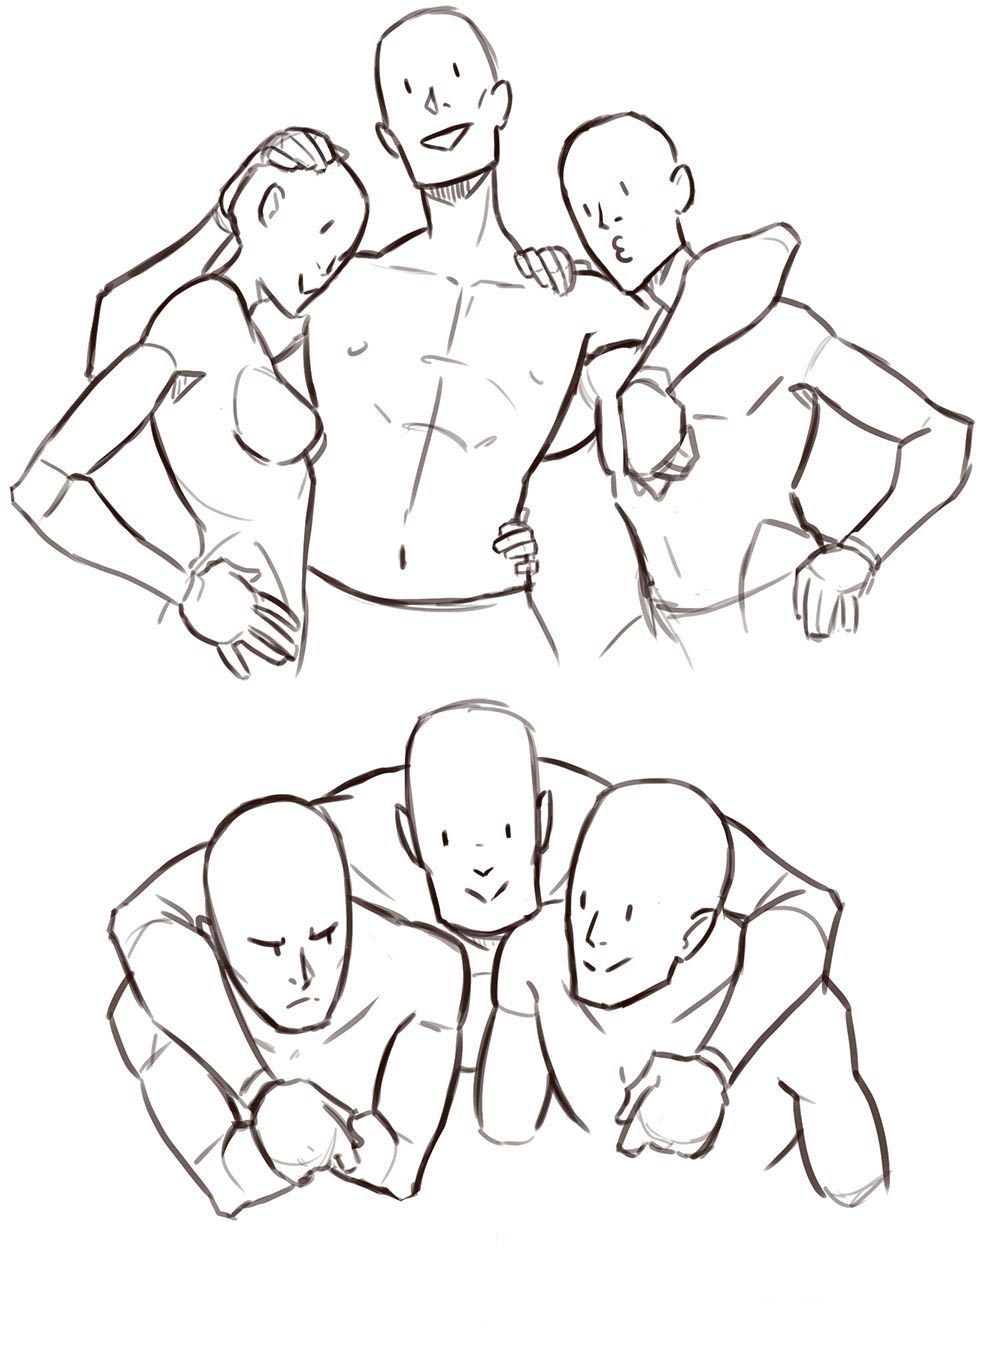 group drawing reference